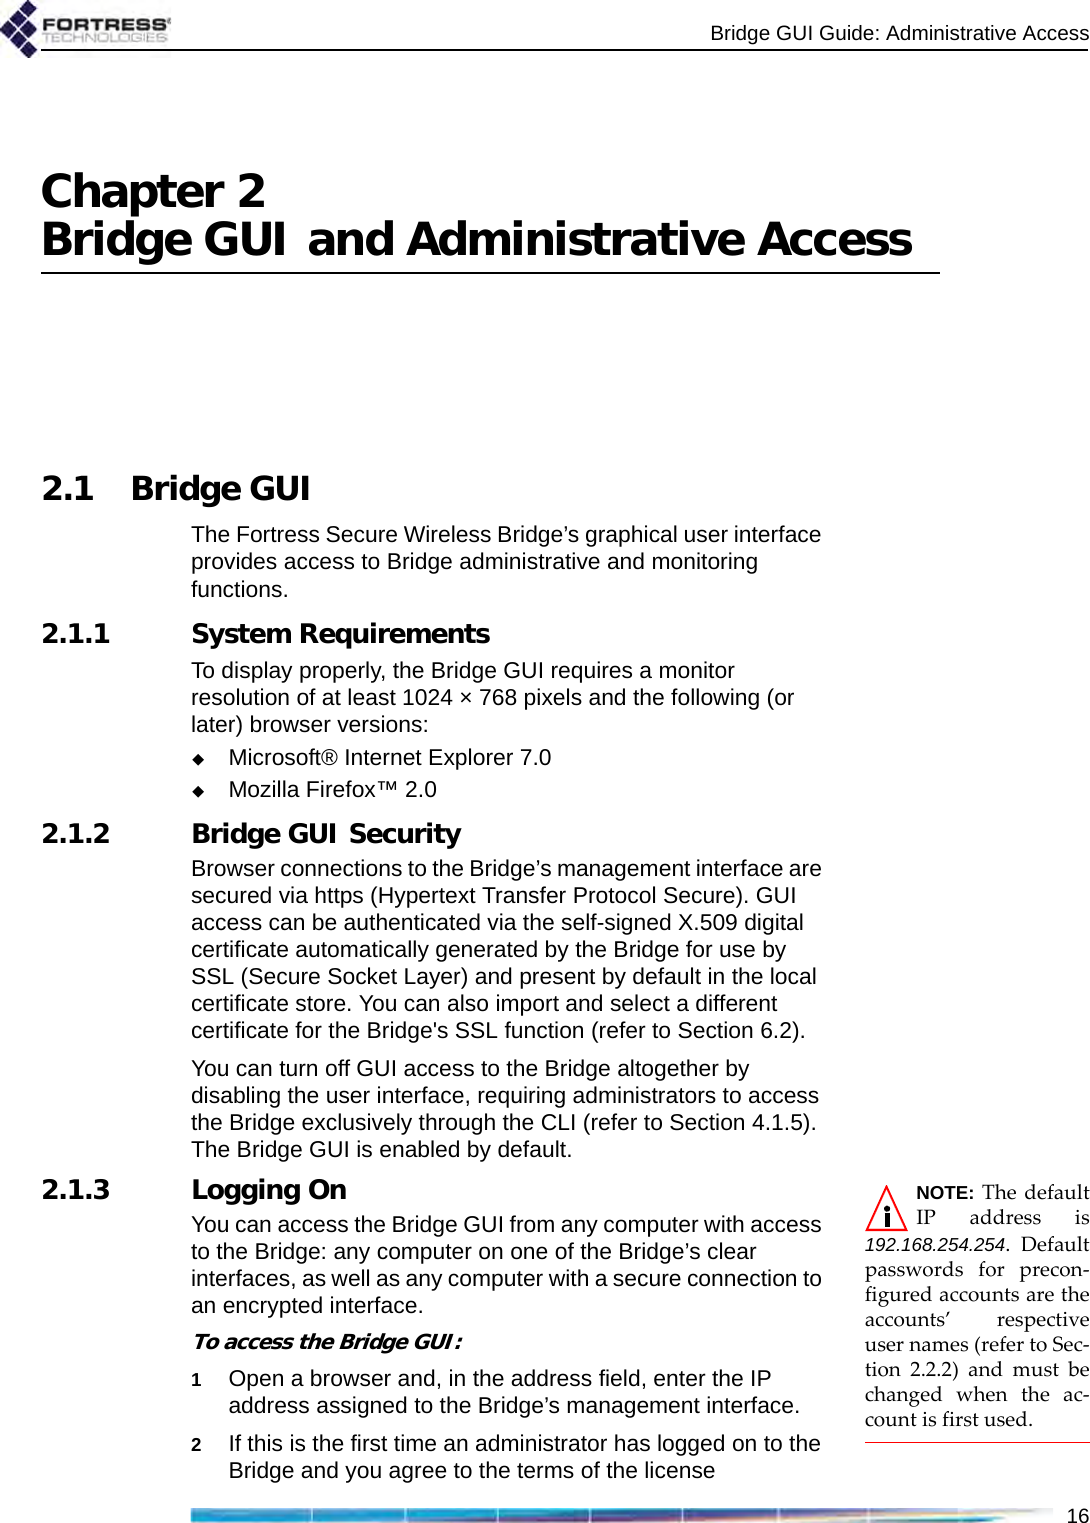 Bridge GUI Guide: Administrative Access16Chapter 2Bridge GUI and Administrative Access2.1 Bridge GUIThe Fortress Secure Wireless Bridge’s graphical user interface provides access to Bridge administrative and monitoring functions. 2.1.1 System RequirementsTo display properly, the Bridge GUI requires a monitor resolution of at least 1024 × 768 pixels and the following (or later) browser versions: Microsoft® Internet Explorer 7.0Mozilla Firefox™ 2.02.1.2 Bridge GUI SecurityBrowser connections to the Bridge’s management interface are secured via https (Hypertext Transfer Protocol Secure). GUI access can be authenticated via the self-signed X.509 digital certificate automatically generated by the Bridge for use by SSL (Secure Socket Layer) and present by default in the local certificate store. You can also import and select a different certificate for the Bridge&apos;s SSL function (refer to Section 6.2).You can turn off GUI access to the Bridge altogether by disabling the user interface, requiring administrators to access the Bridge exclusively through the CLI (refer to Section 4.1.5). The Bridge GUI is enabled by default.NOTE: The defaultIP address is192.168.254.254. Defaultpasswords for precon-figured accounts are theaccounts’ respectiveuser names (refer to Sec-tion 2.2.2) and must bechanged when the ac-count is first used.2.1.3 Logging OnYou can access the Bridge GUI from any computer with access to the Bridge: any computer on one of the Bridge’s clear interfaces, as well as any computer with a secure connection to an encrypted interface.To access the Bridge GUI:1Open a browser and, in the address field, enter the IP address assigned to the Bridge’s management interface.2If this is the first time an administrator has logged on to the Bridge and you agree to the terms of the license 